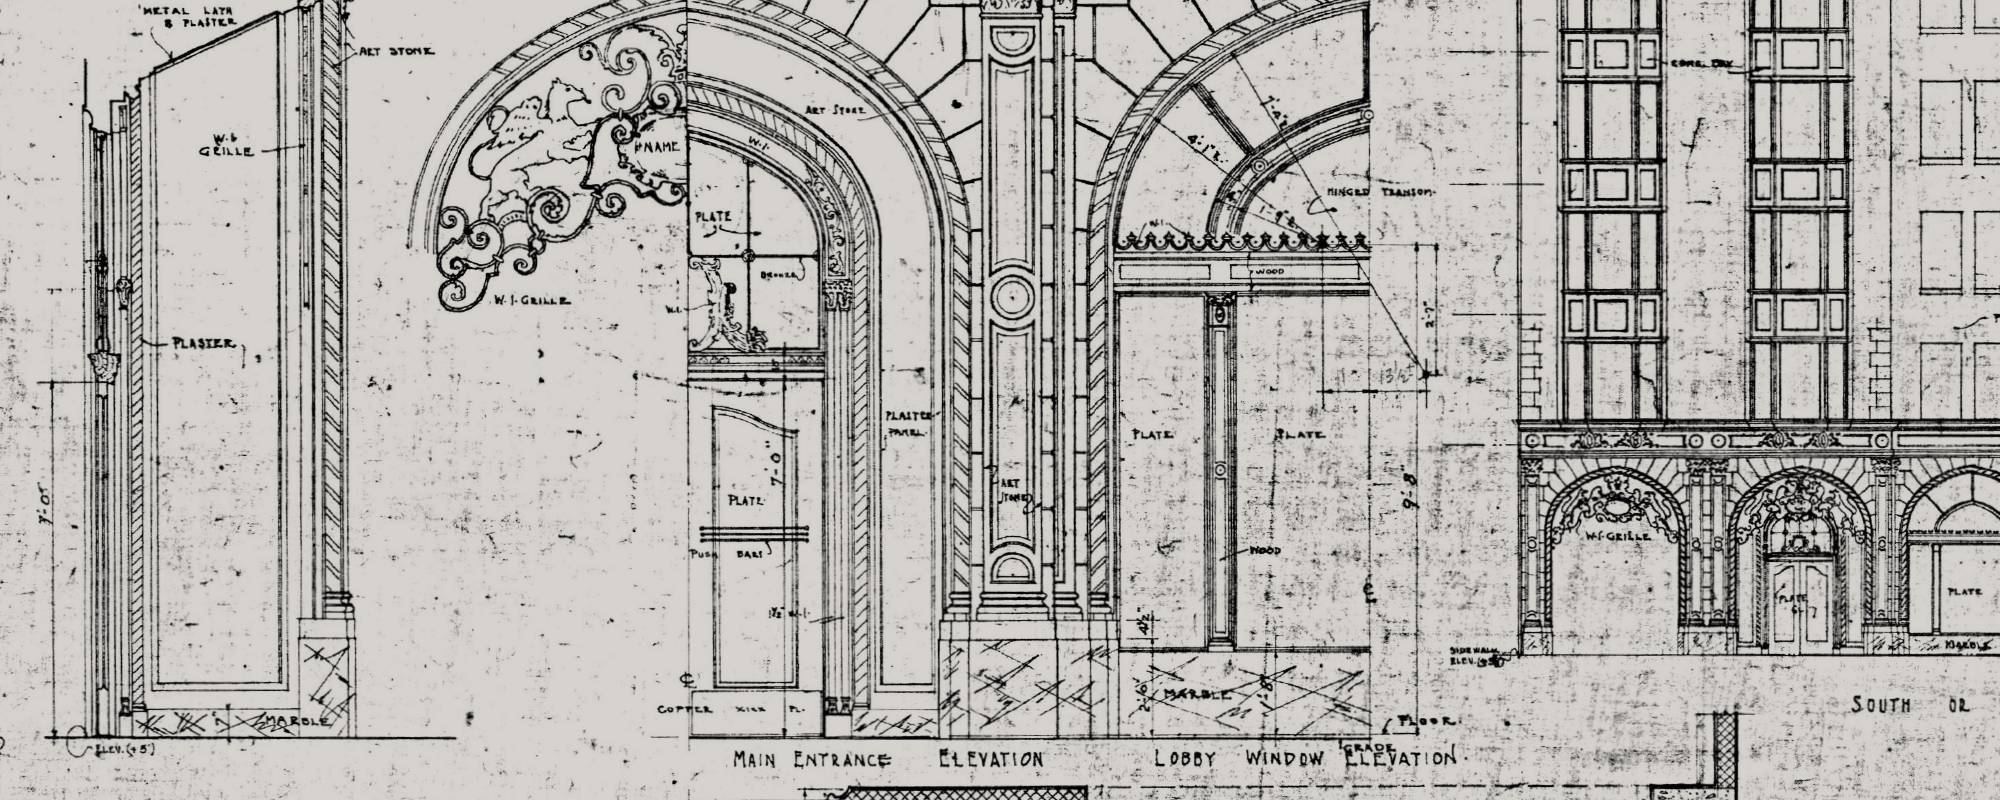 Header photo, vintage architectural drawing